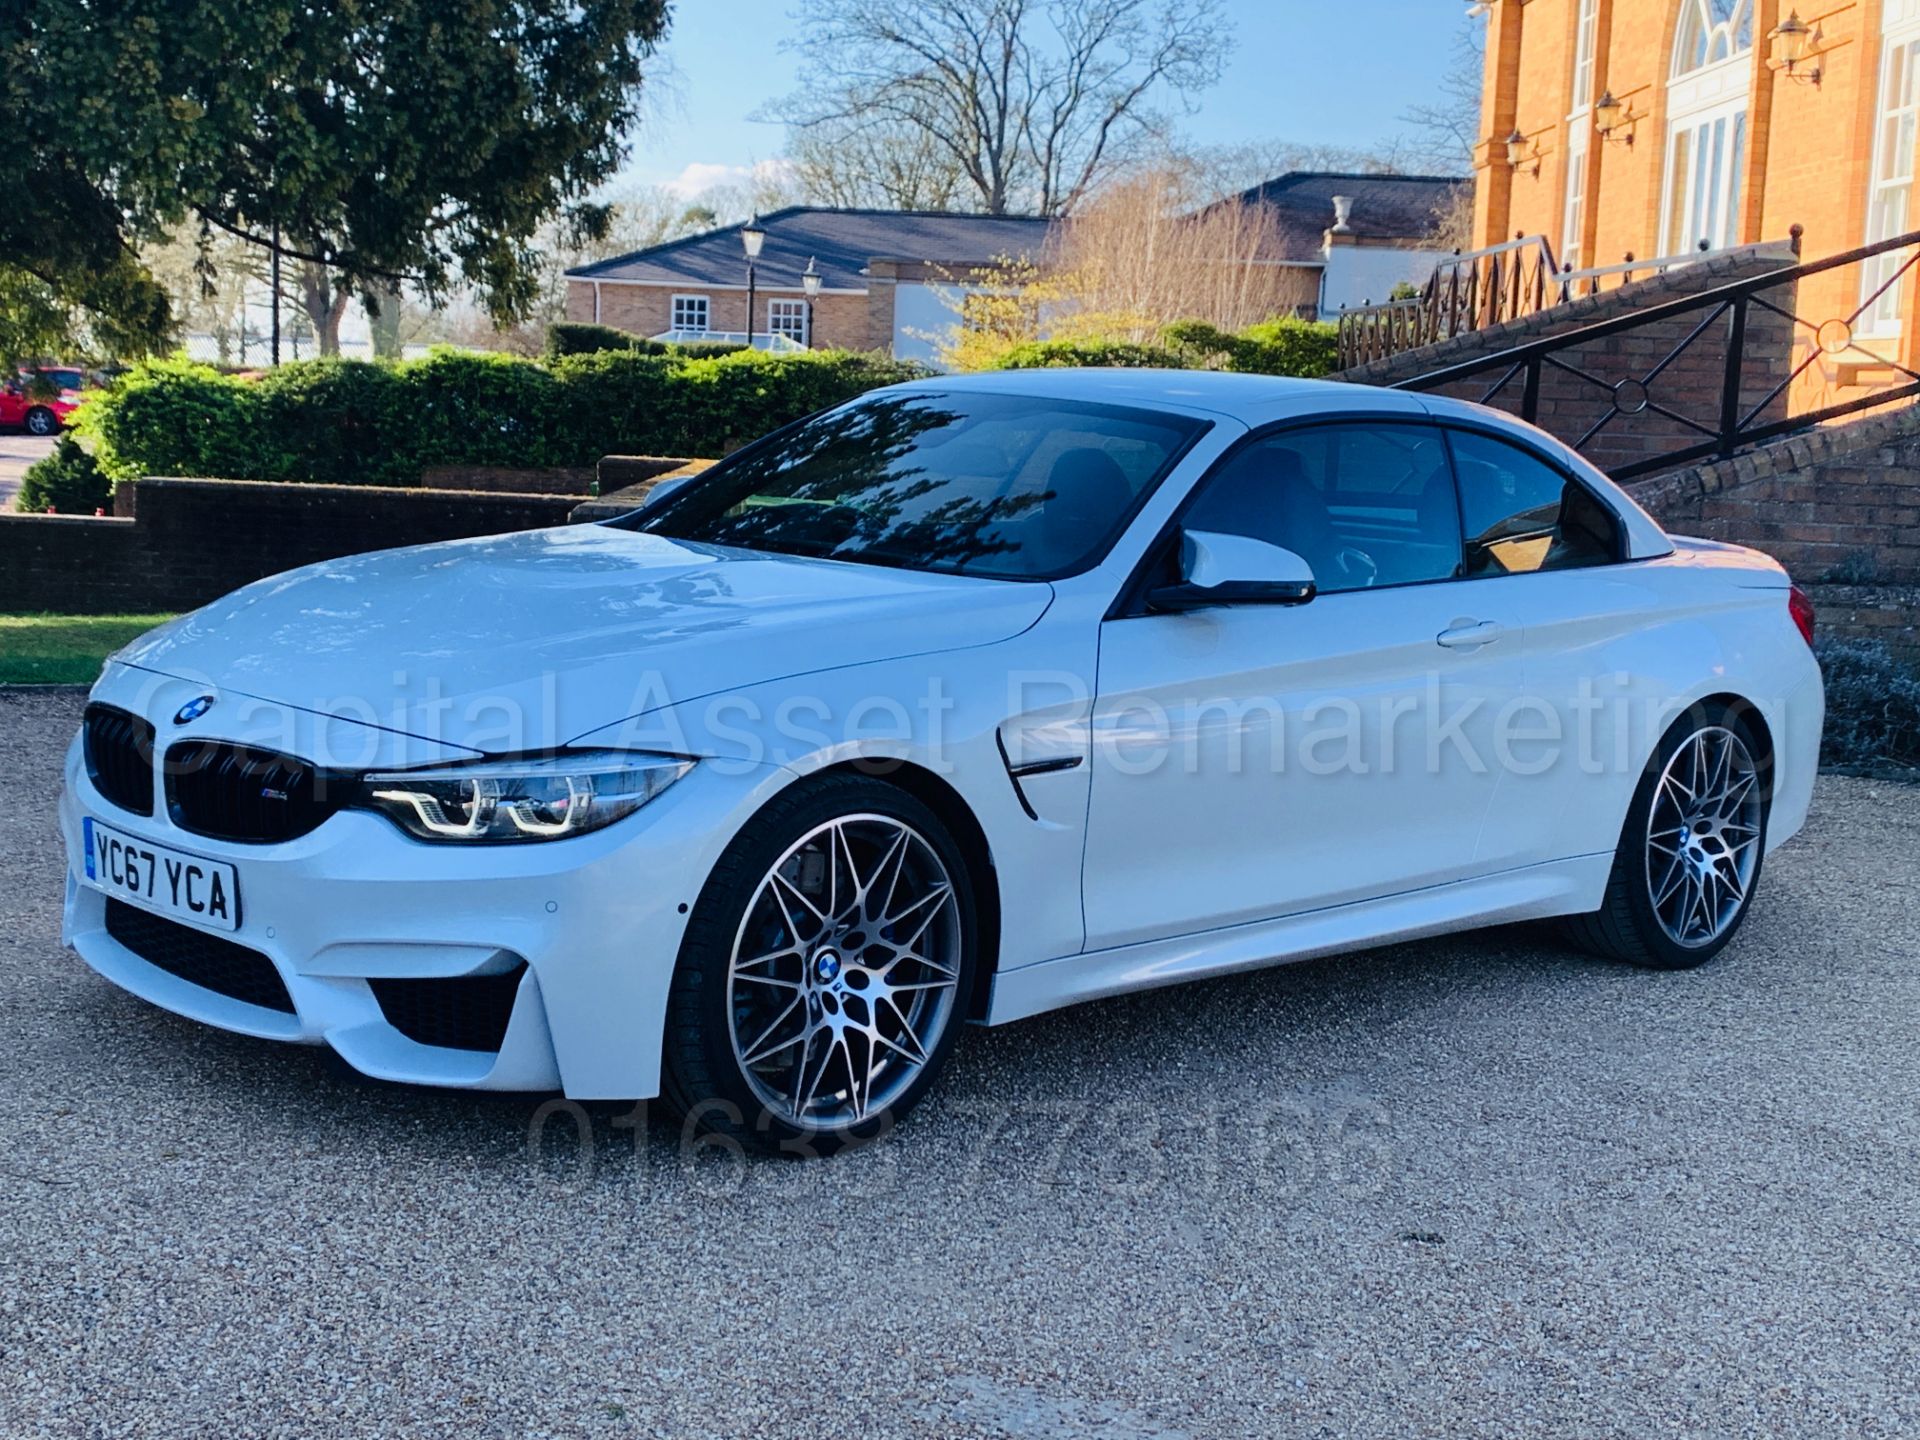 ON SALE BMW M4 CONVERTIBLE *COMPETITION PACKAGE* (2018 MODEL) '431 BHP - M DCT AUTO' WOW!!!!! - Image 6 of 89